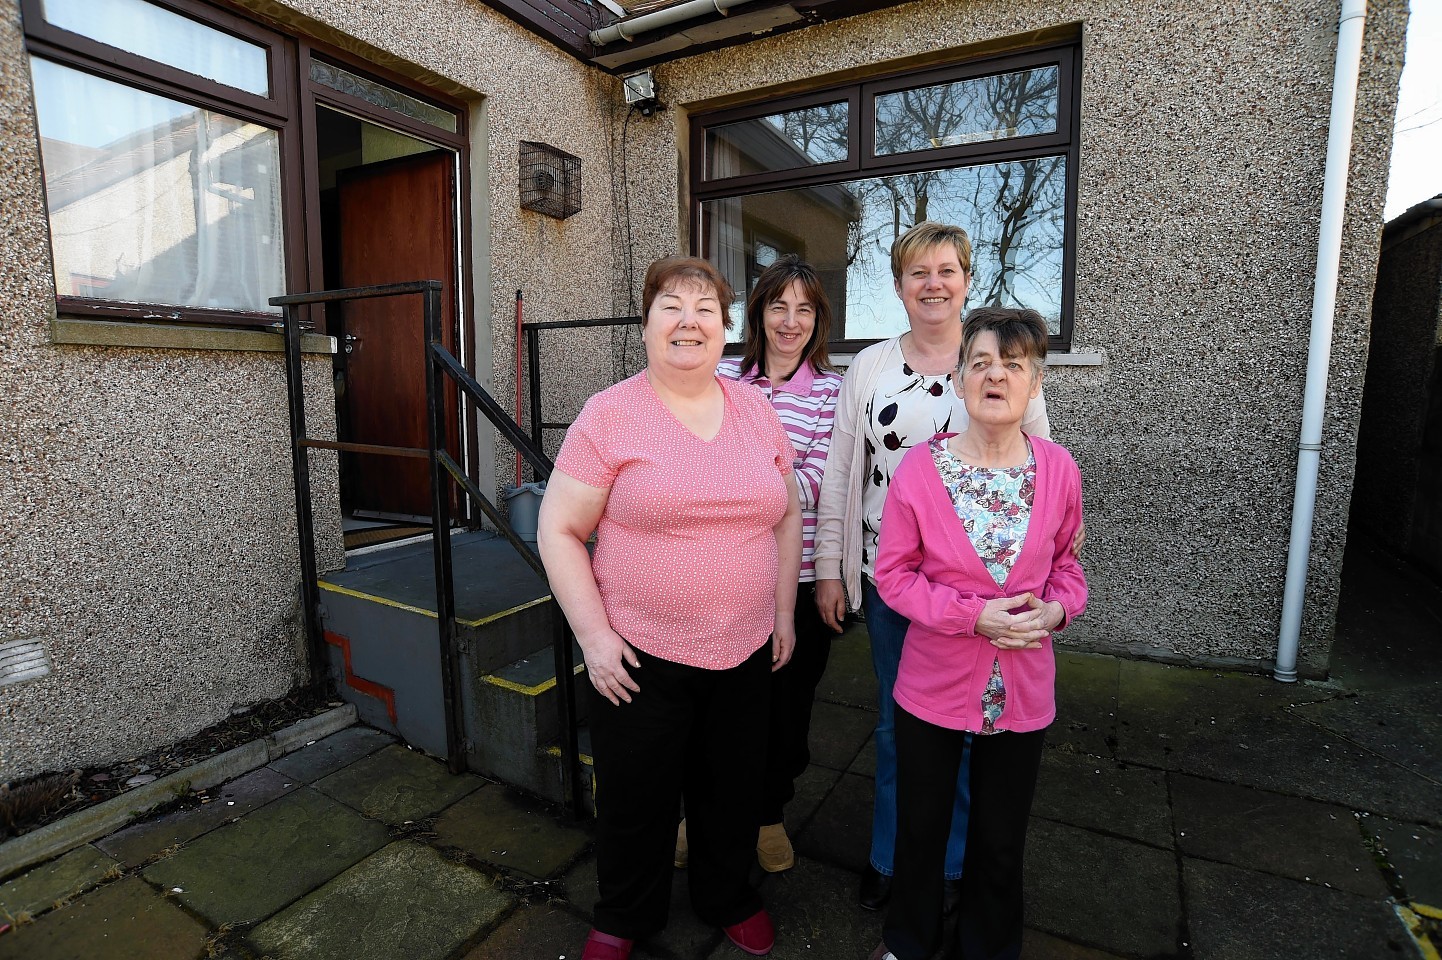 Rhonda McLean, support assistant, Patricia McManus, support worker, Mary Ritchie and Muriel Johnston at Eden House